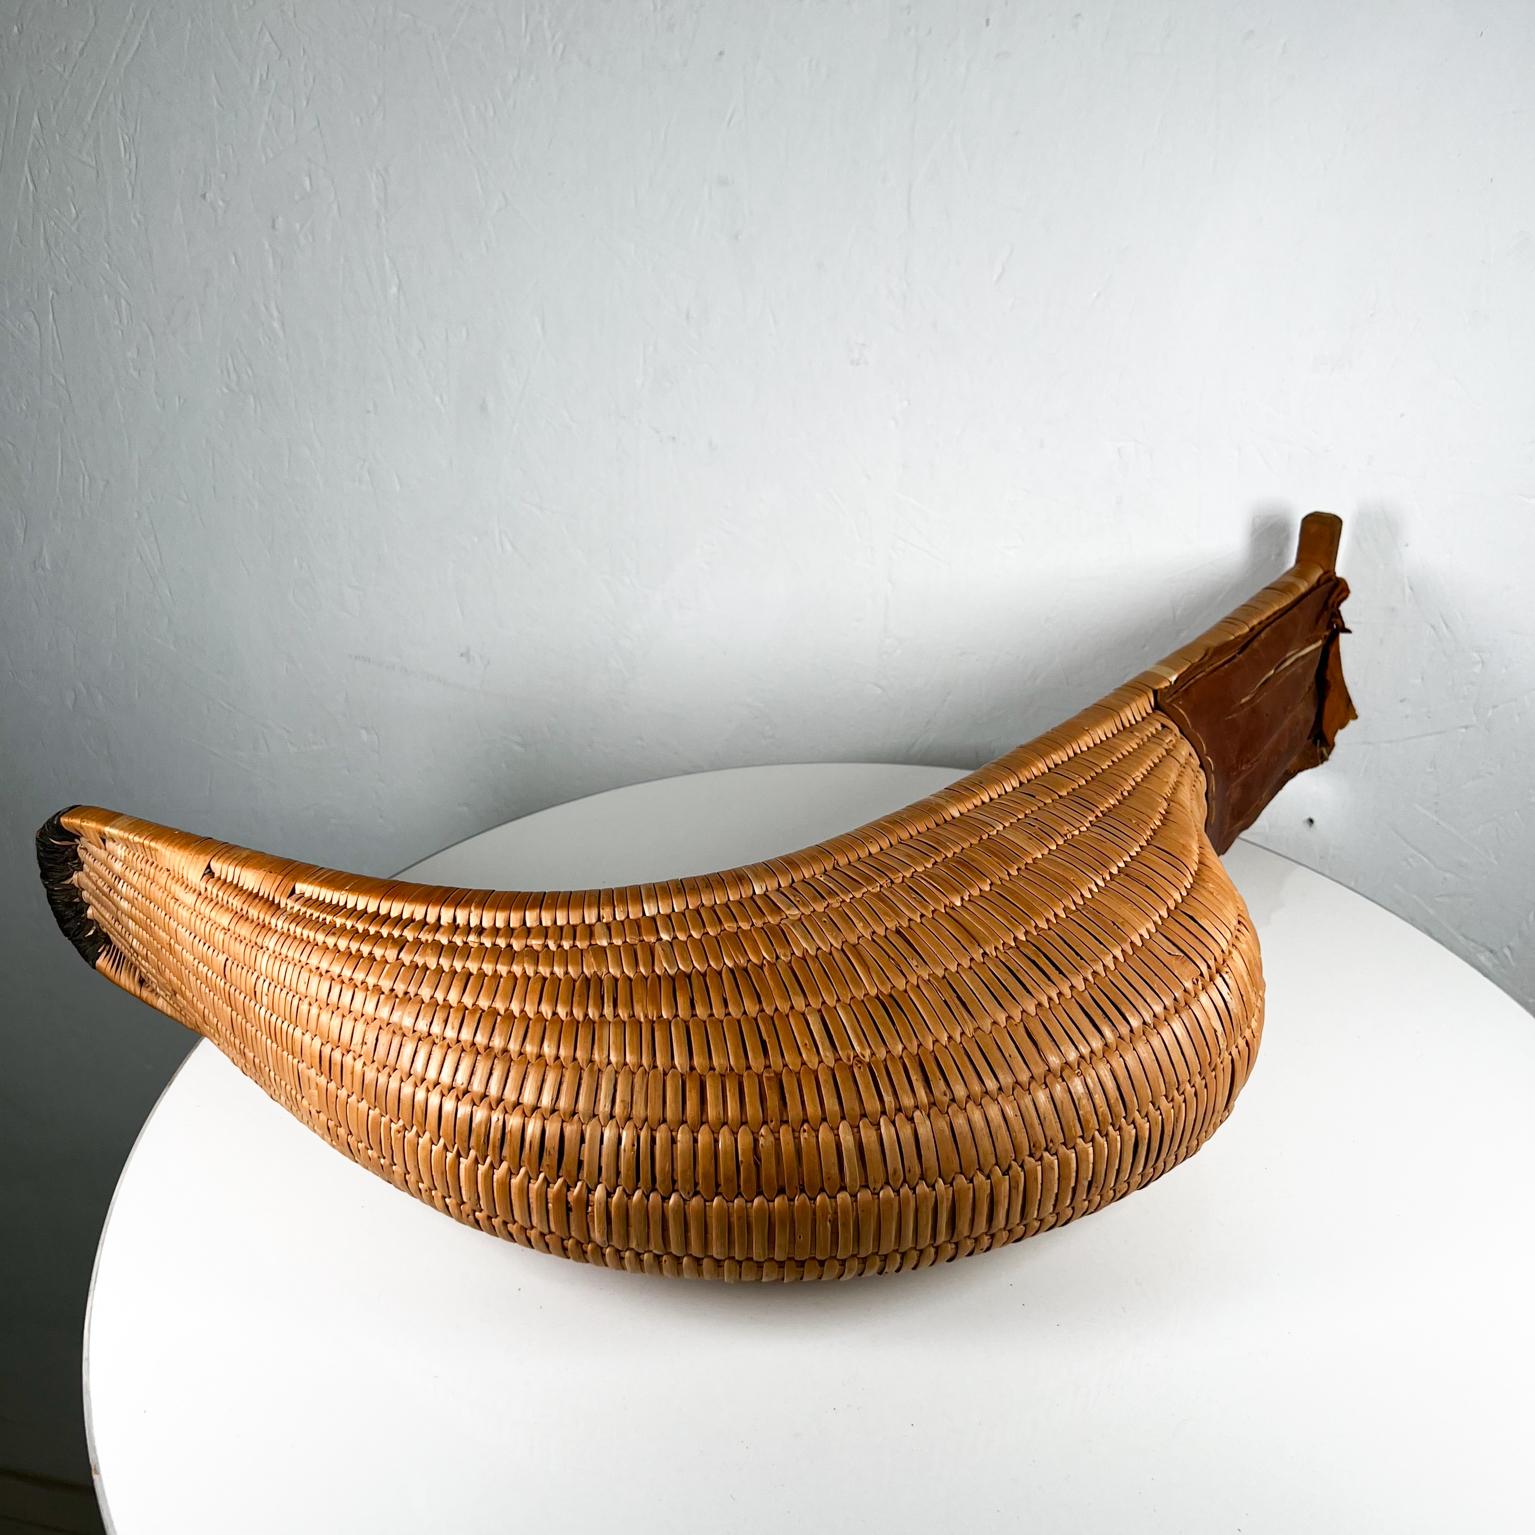 1970s Sport Vintage Cesta Curved Basket Distressed Leather Jai Alai from Mexico
Vintage Cesta Jai Alai Mexico
Catch All
Vintage unrestored condition. Leather is worn out.
22.5 tall x 18 depth x 4.75 width
Refer to all images.